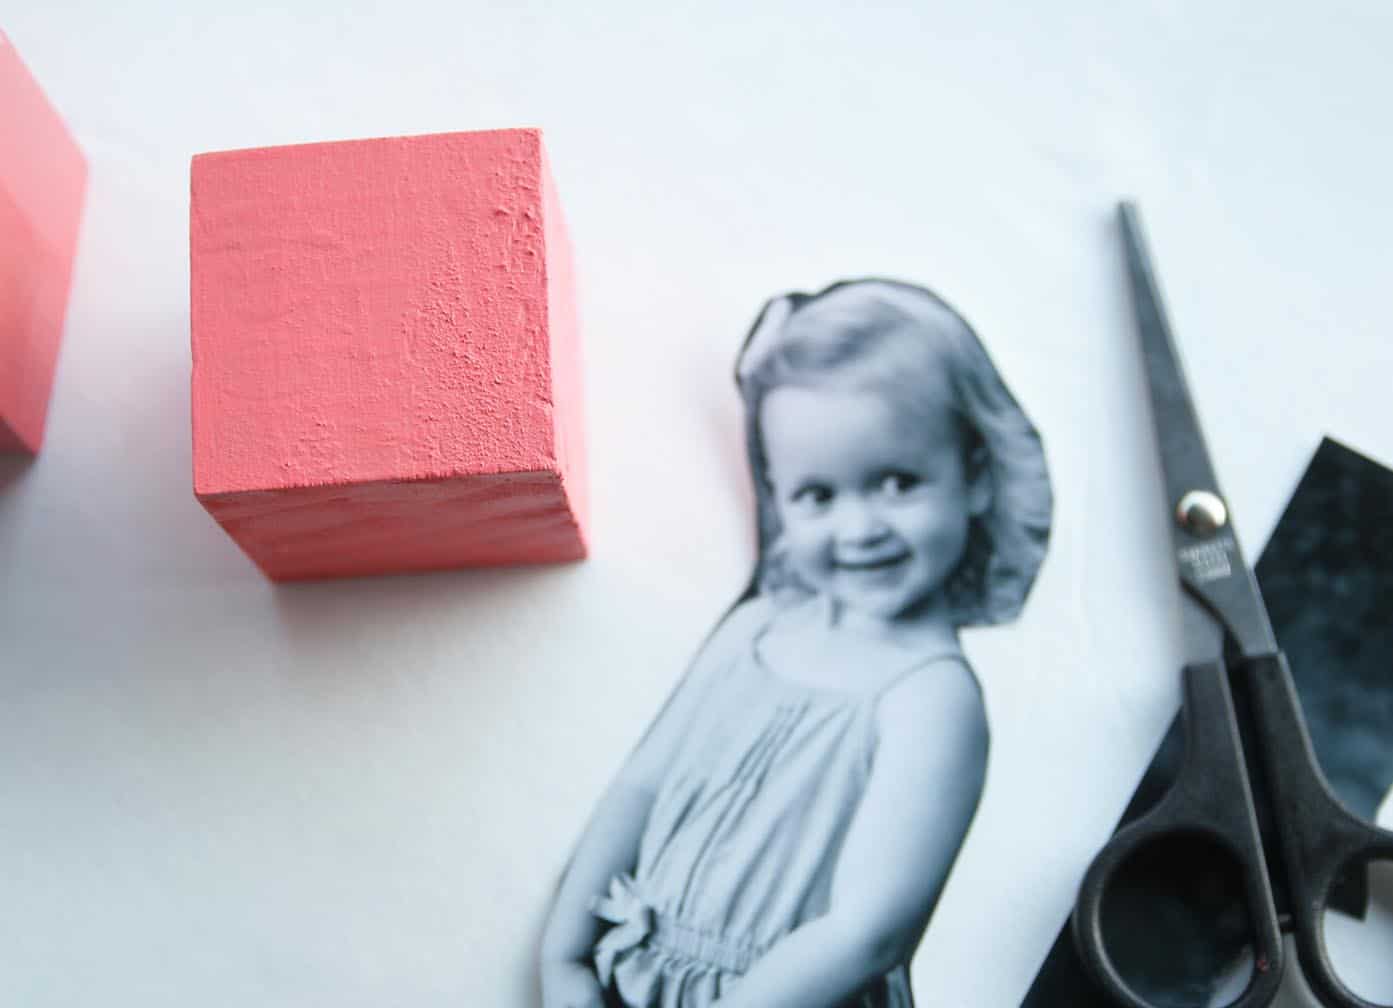 Make a modern twist on some photo blocks by using black and white pictures. Your child will love playing with them!